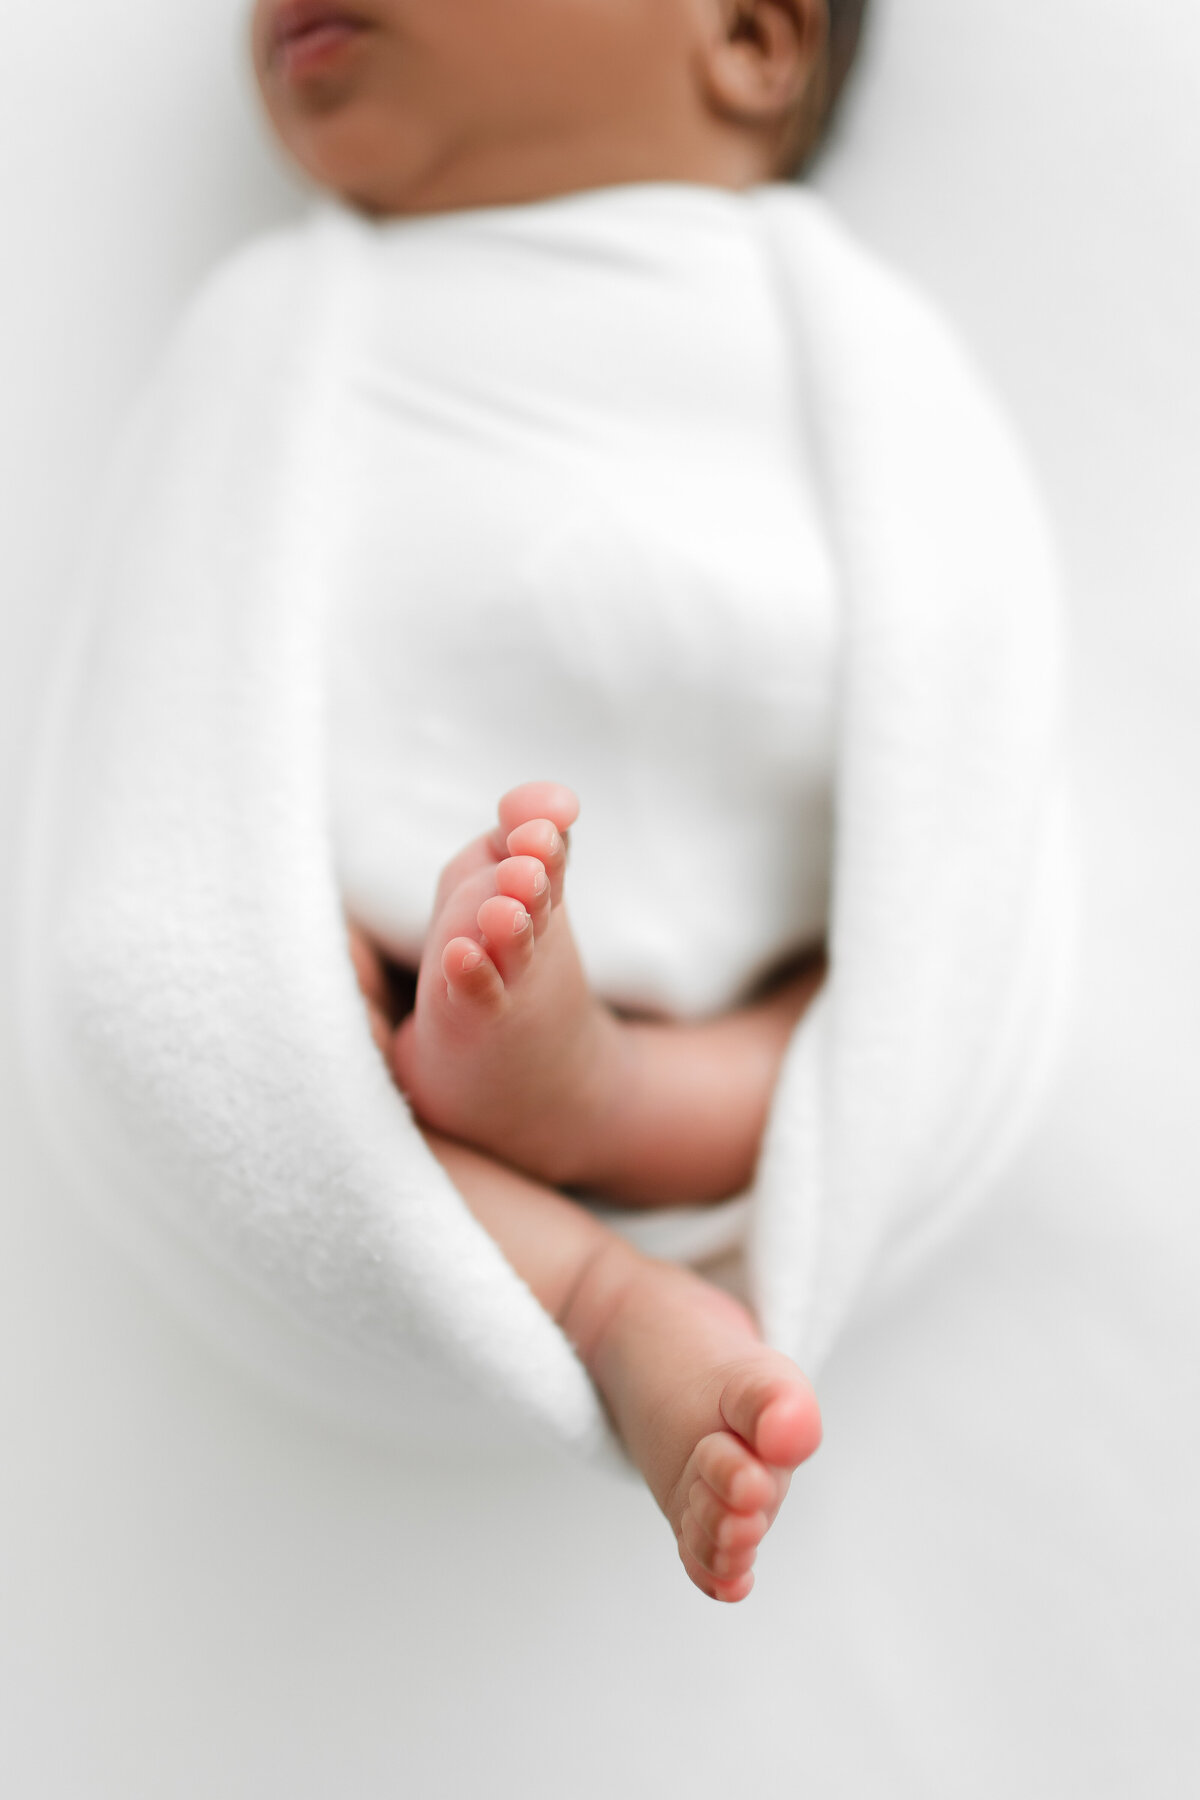 A closeup Virginia Newborn Photographer photo of a baby girl's feet swaddled in a white blanket